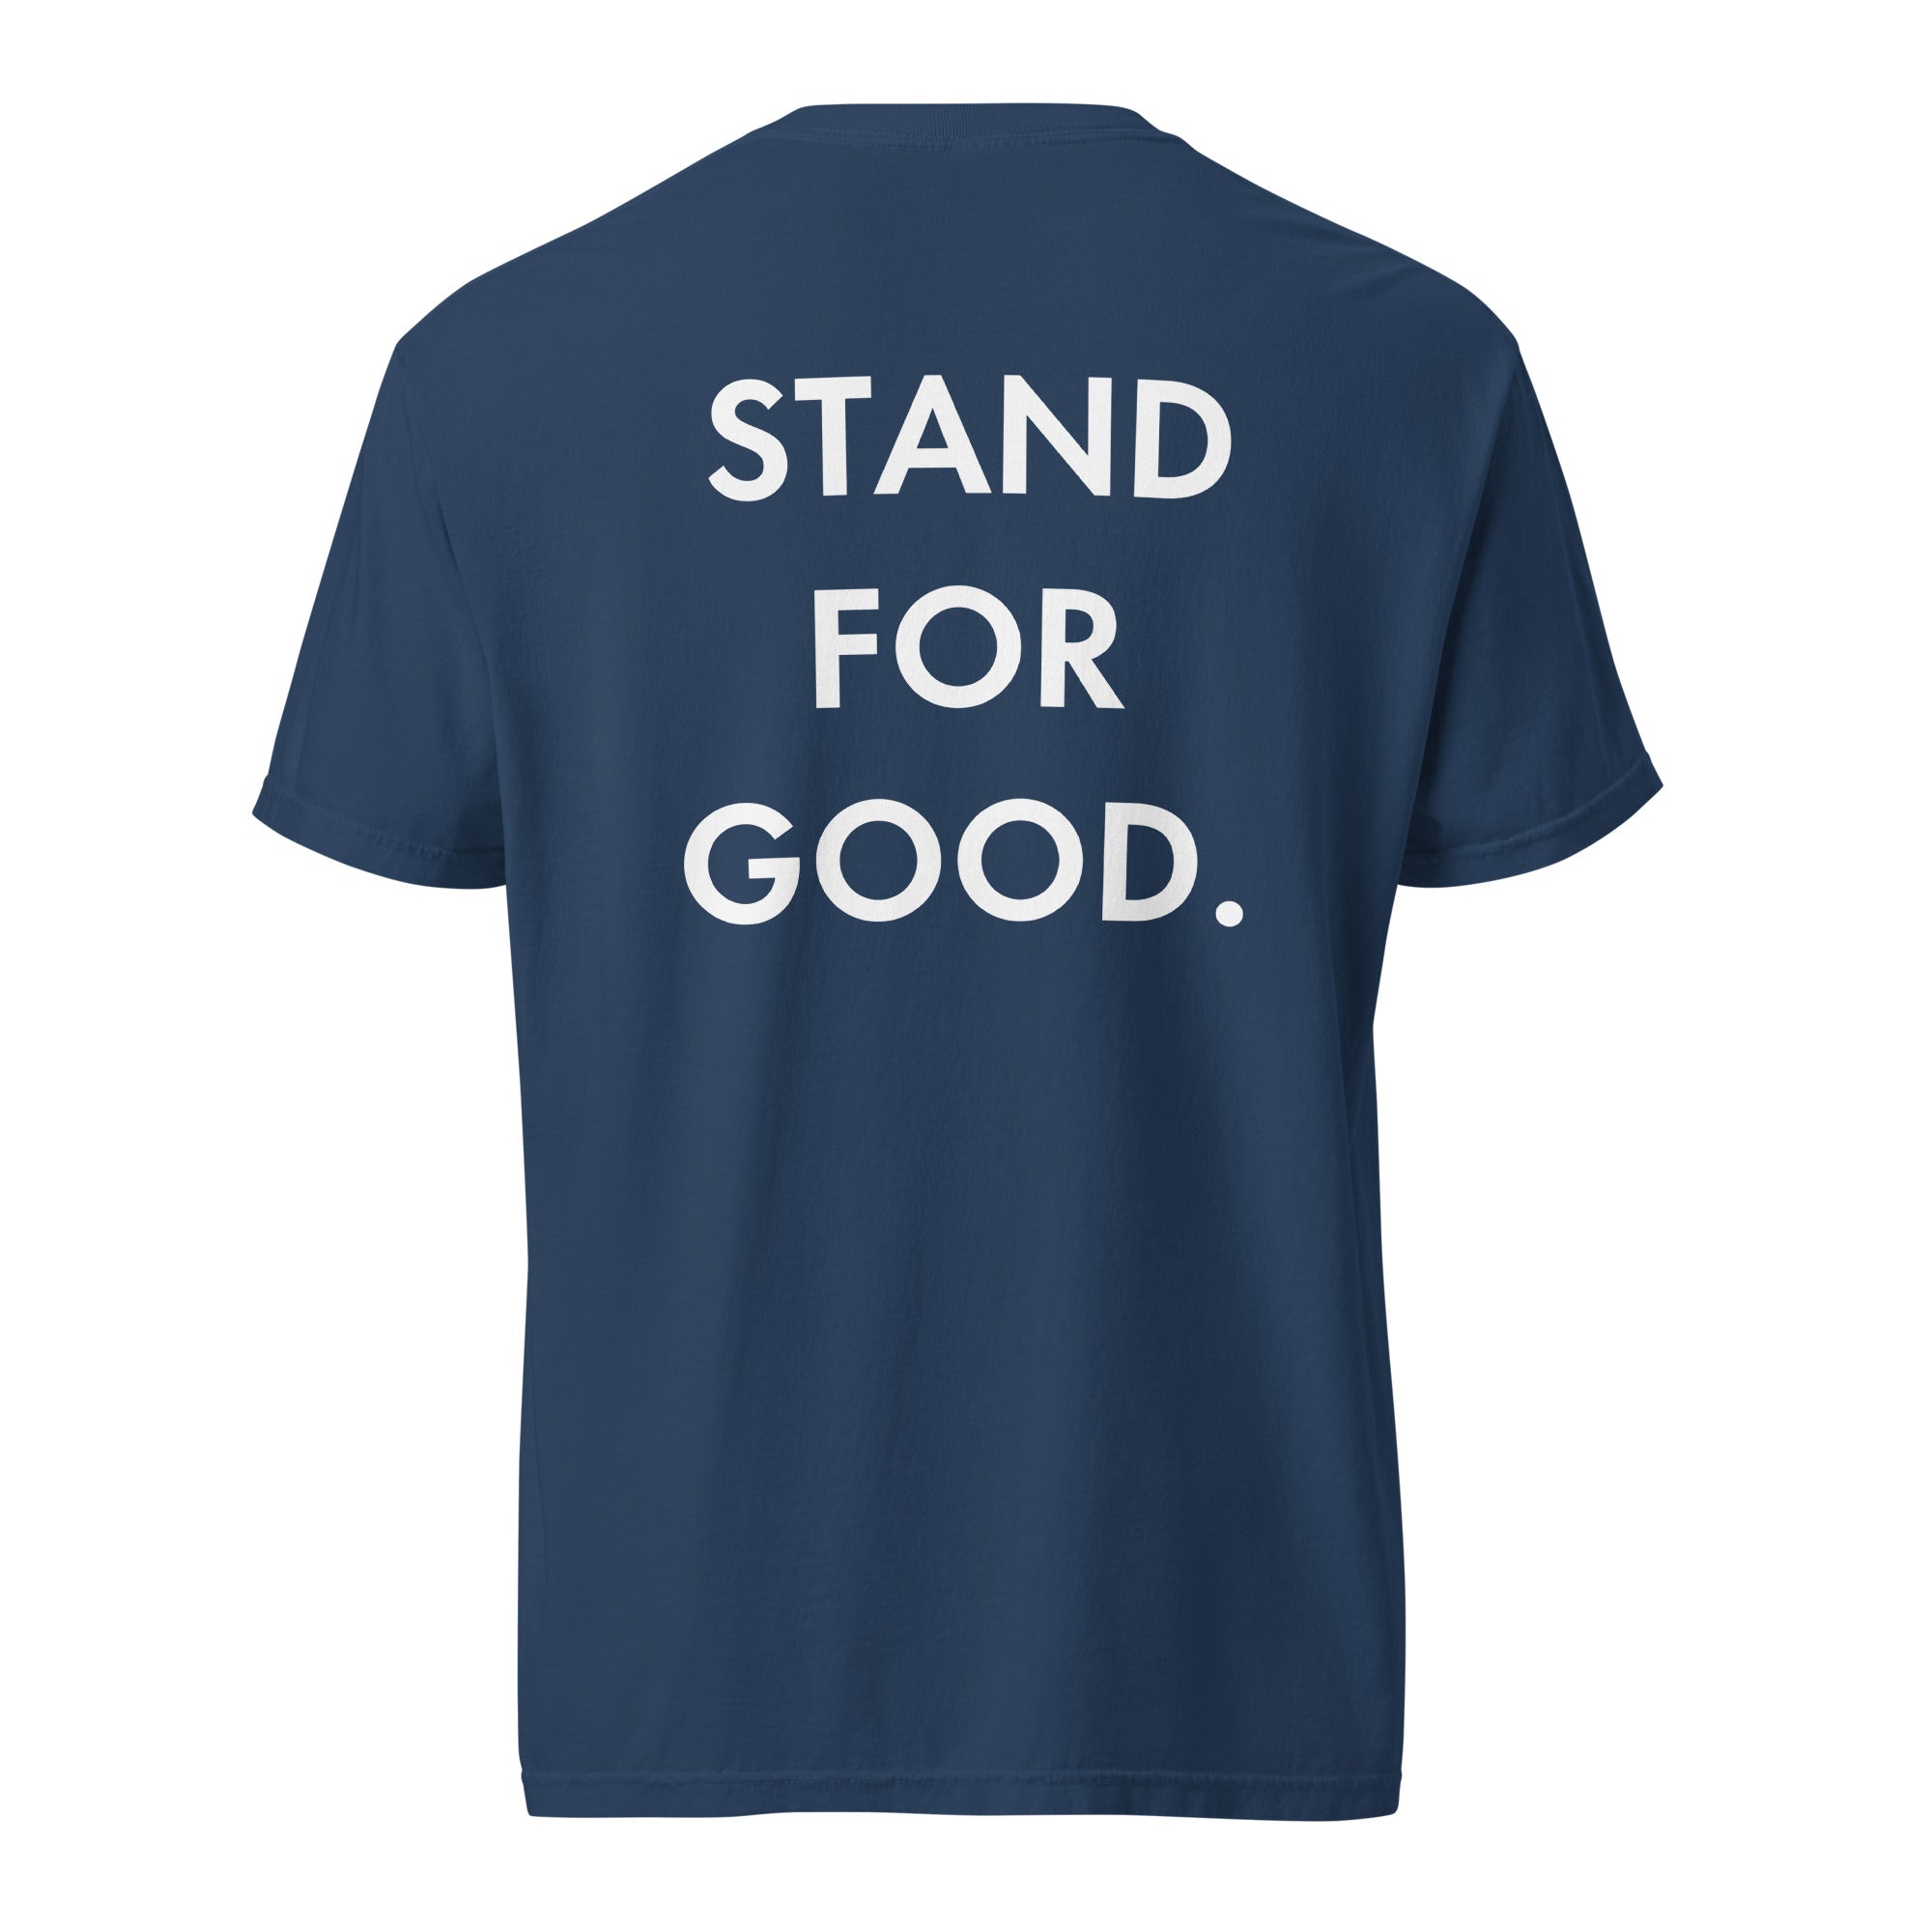 Stand for Good Tee